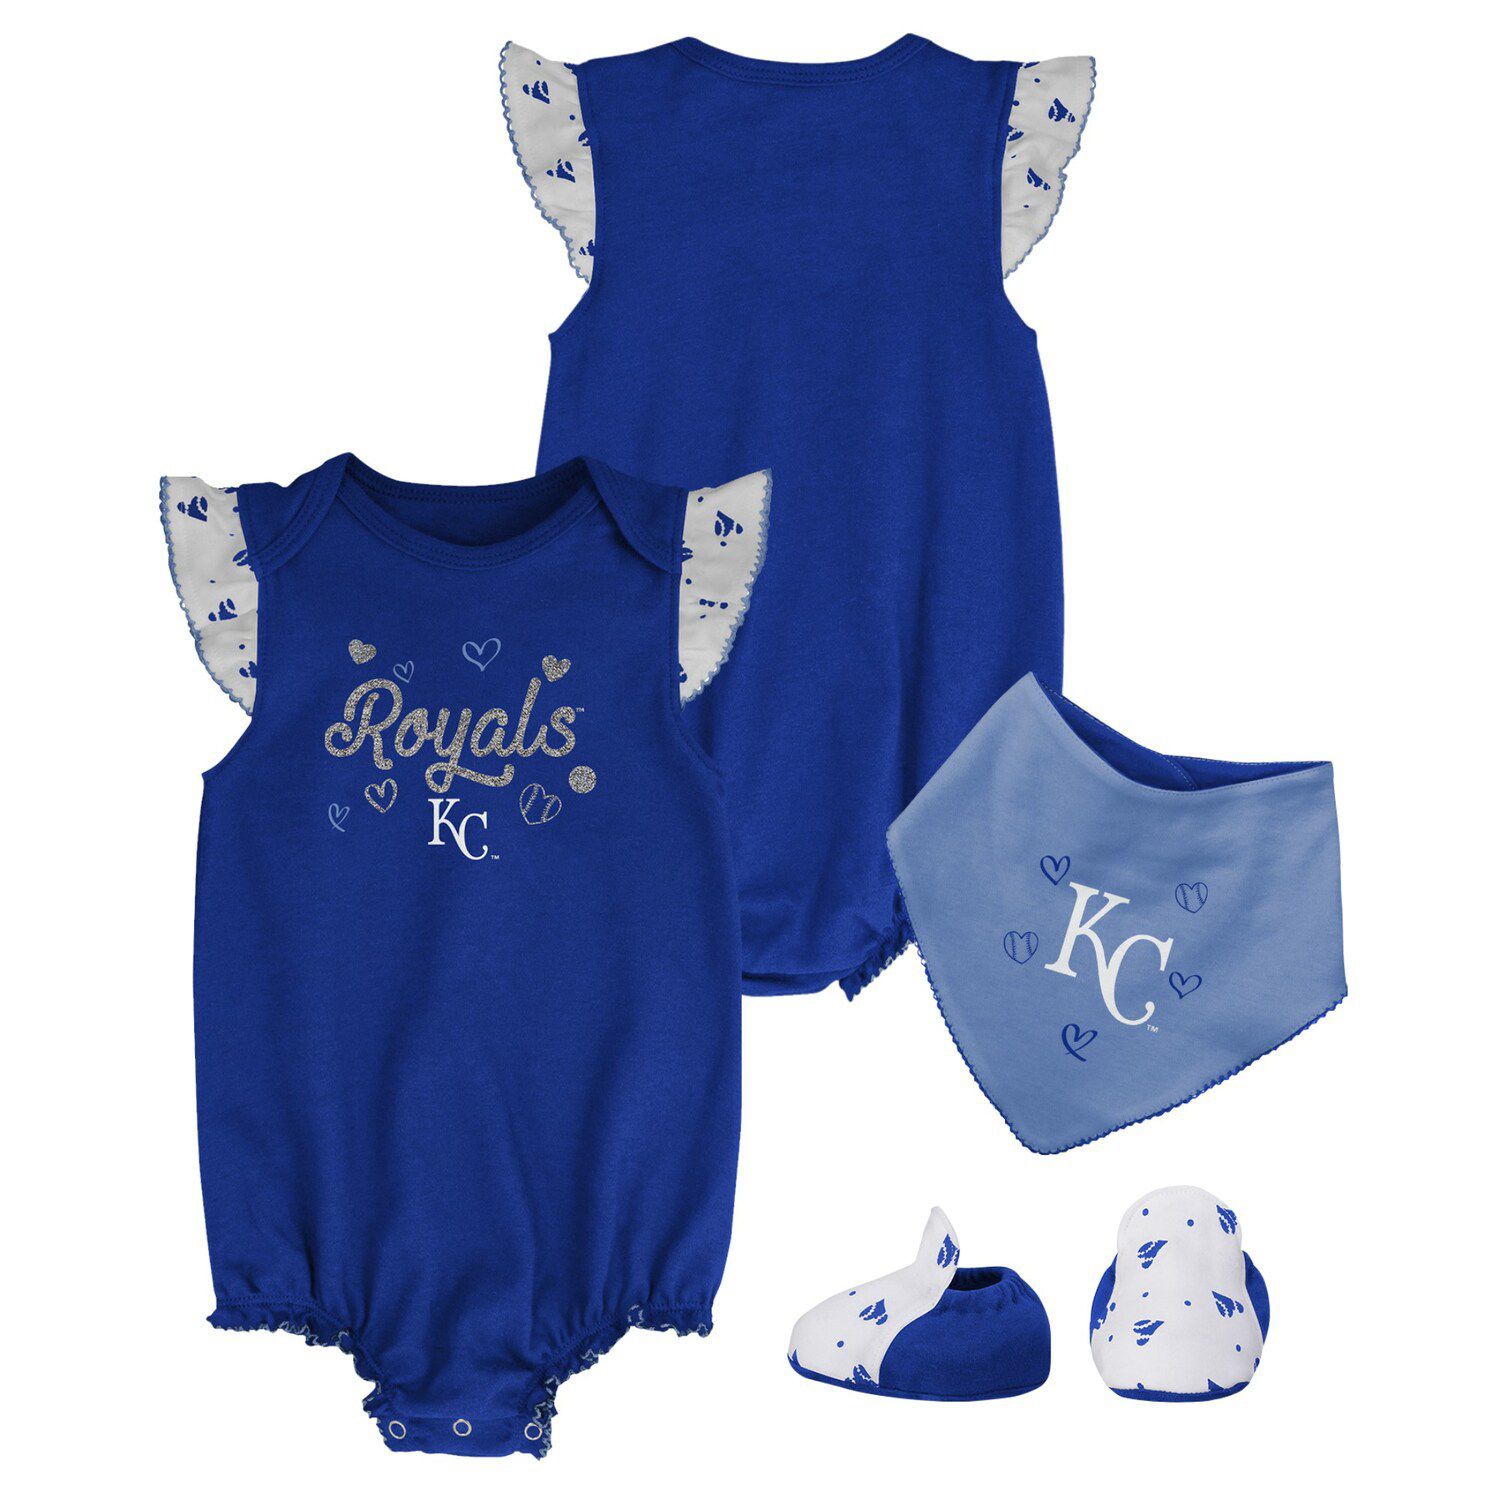 New! Kansas City Royals 3-pack One Piece Baby Boys Outfit 0/3 Months